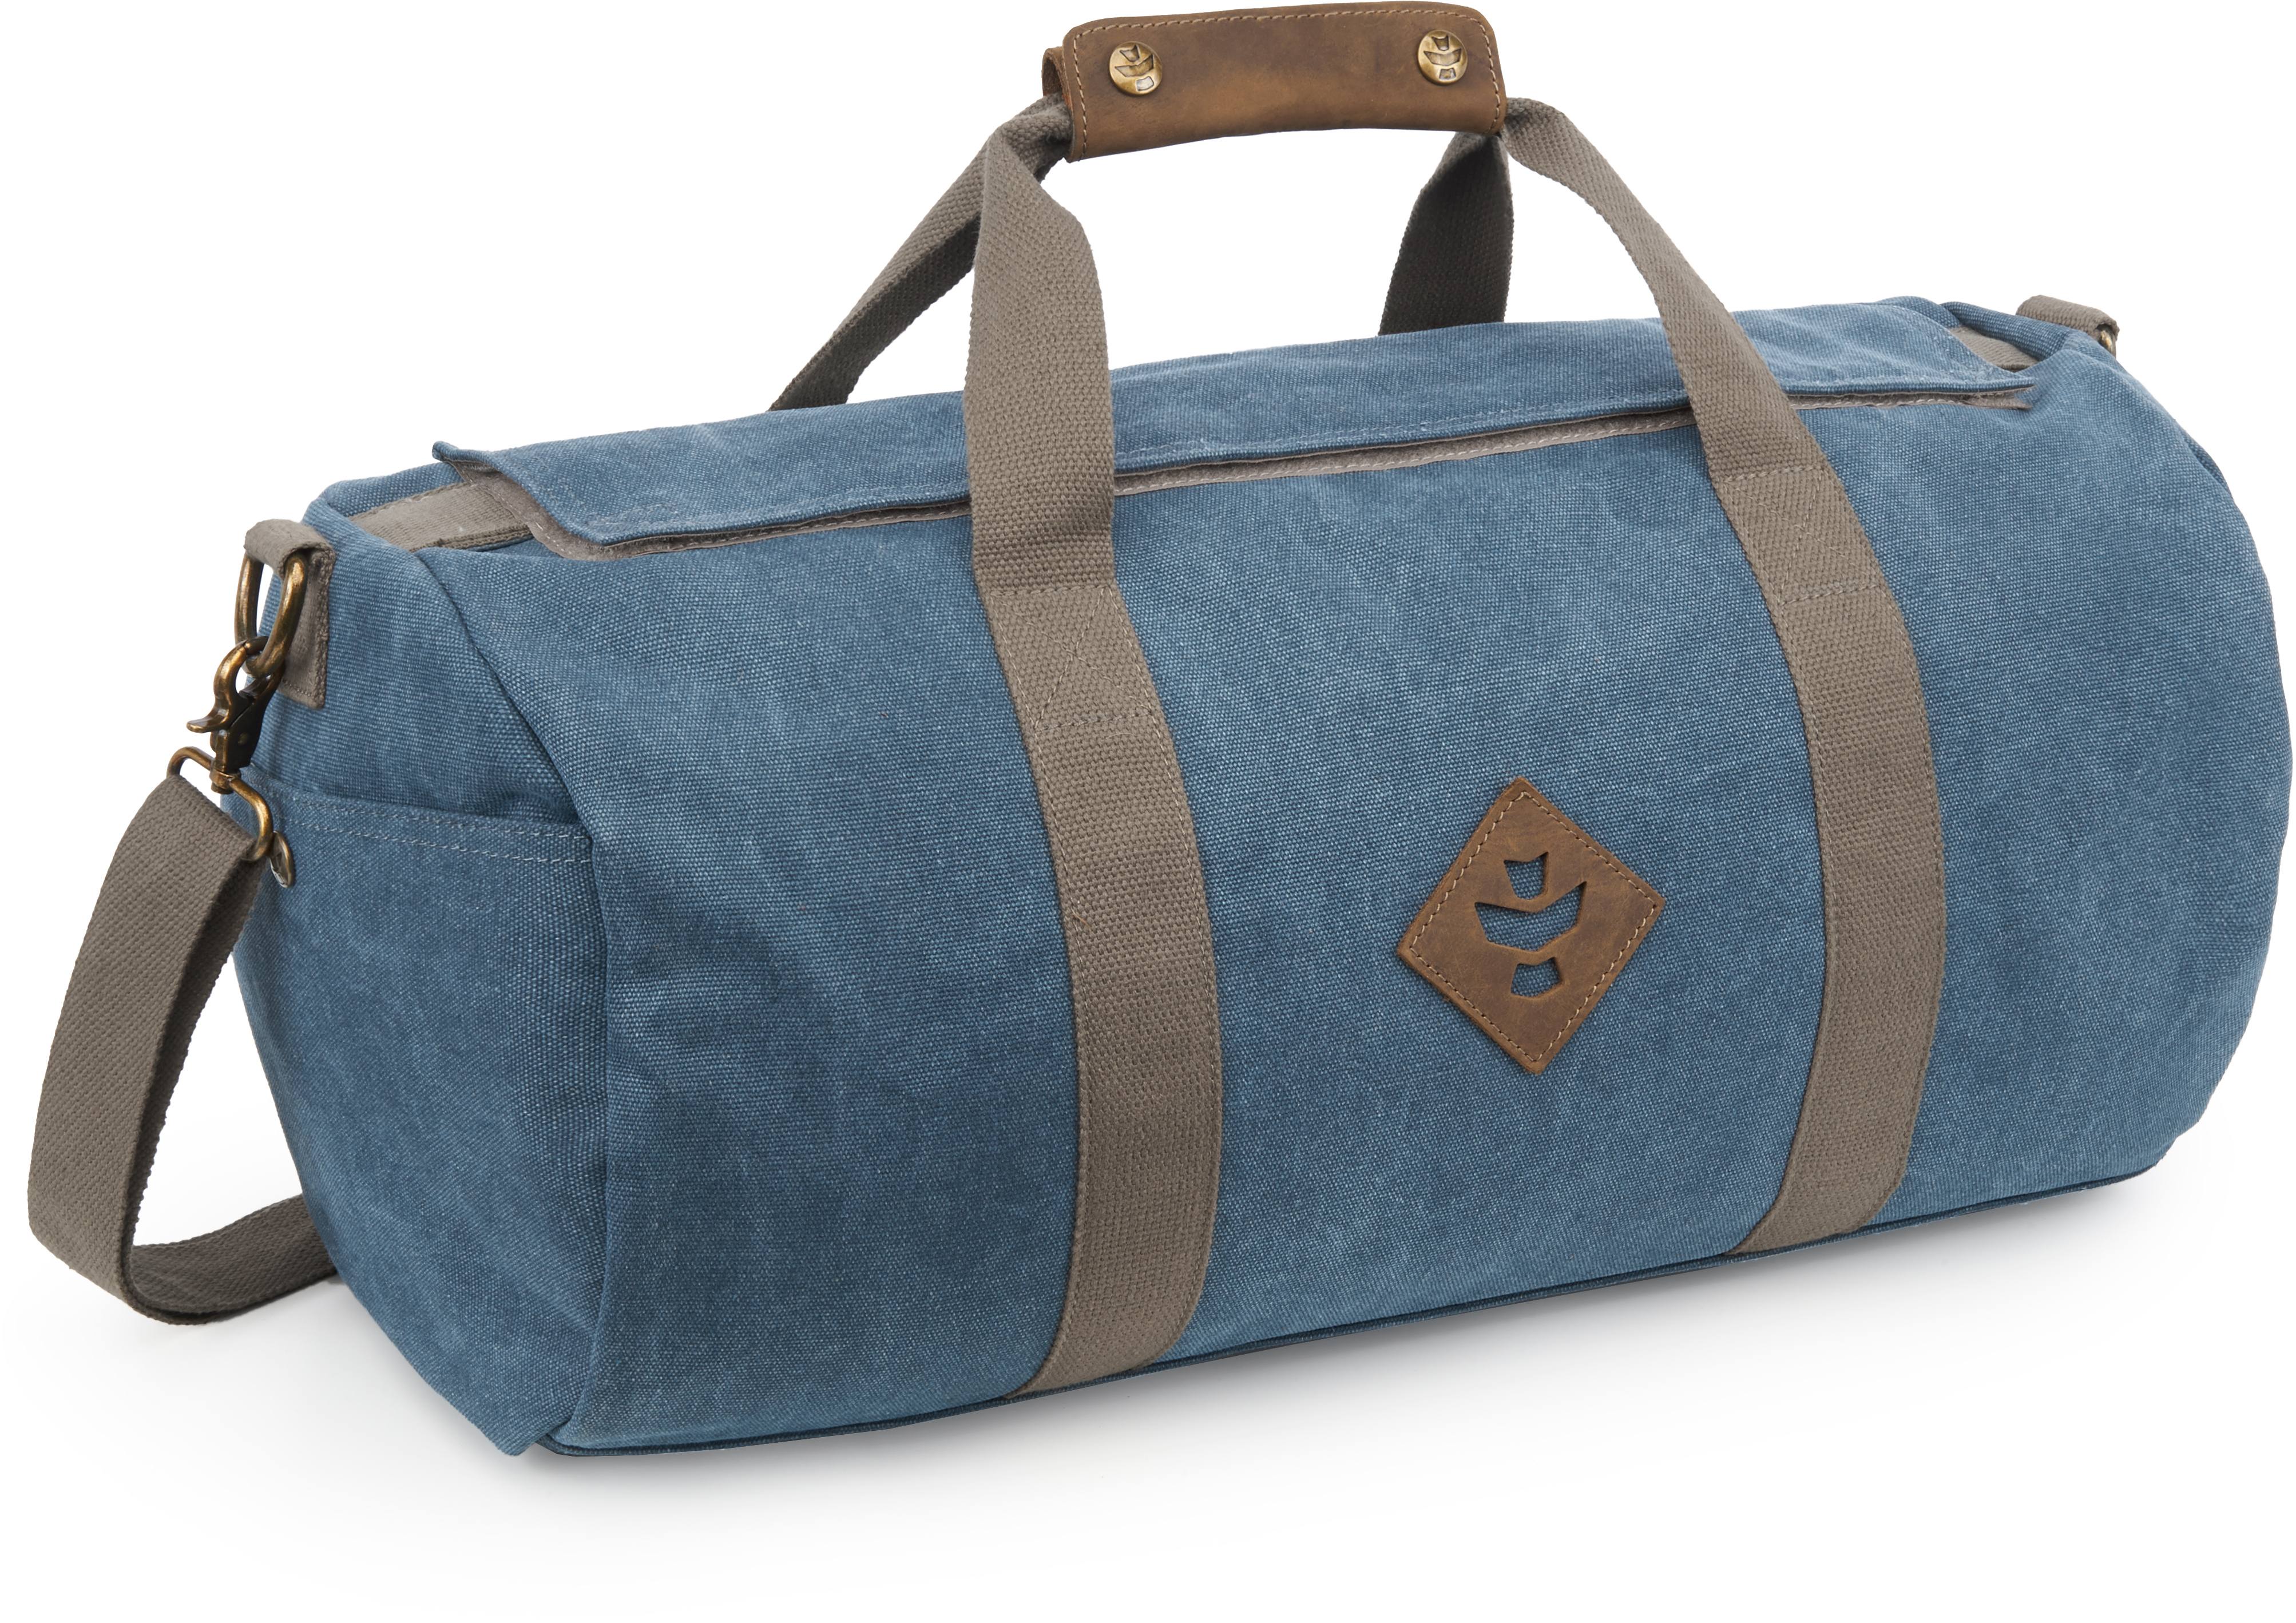 Picture for Revelry Supply The Overnighter Small Duffle, Marine